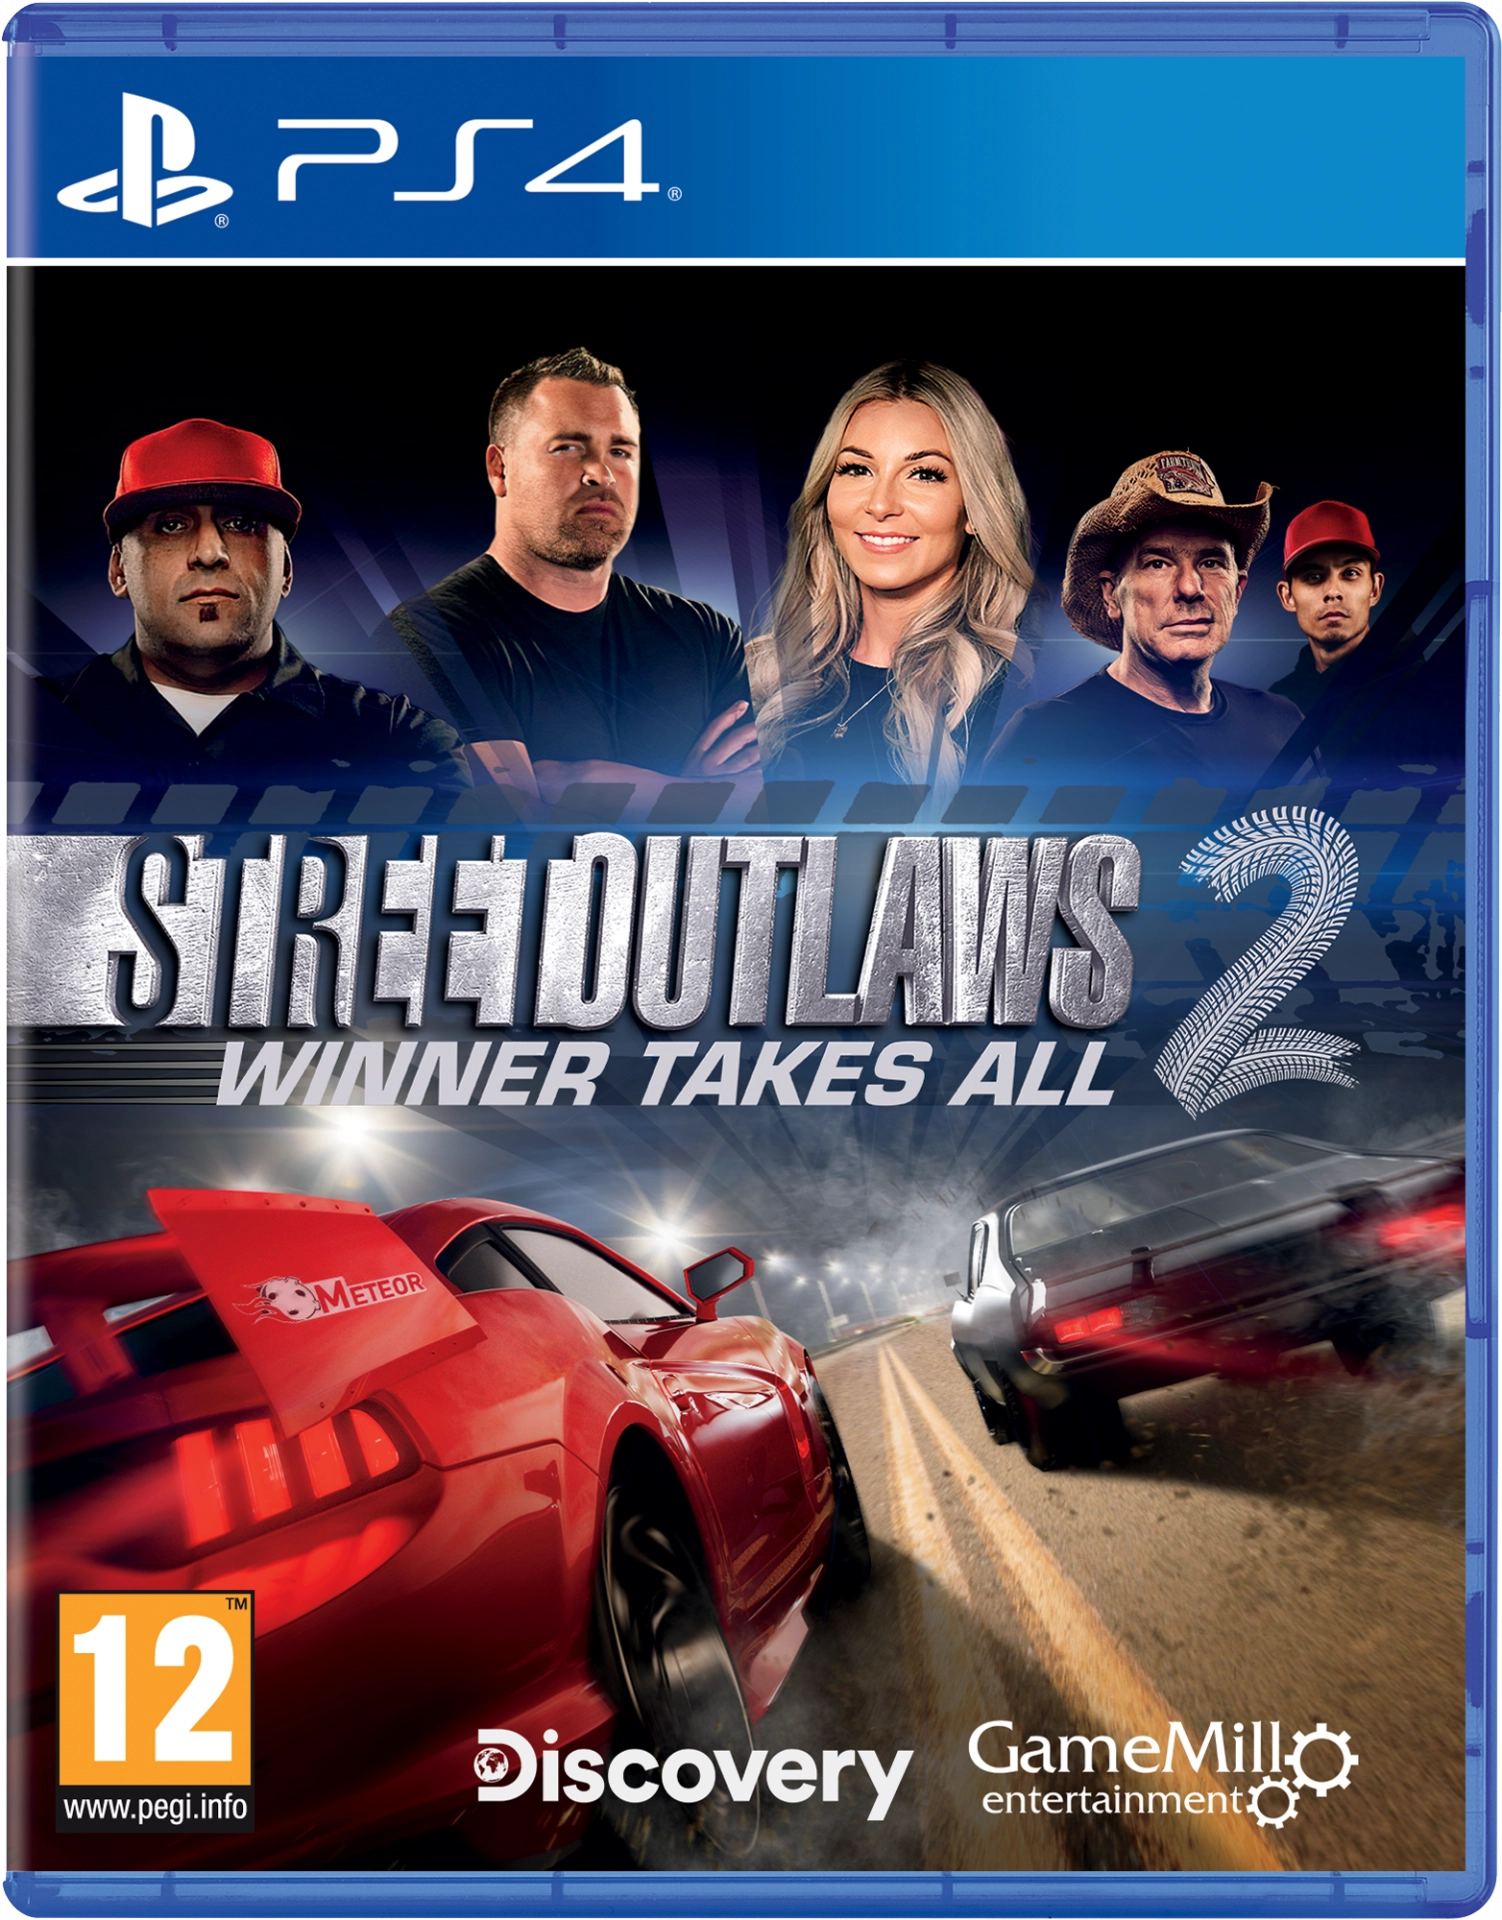 Street Outlaws 2: Winner Takes All (PS4), GameMill Entertainment